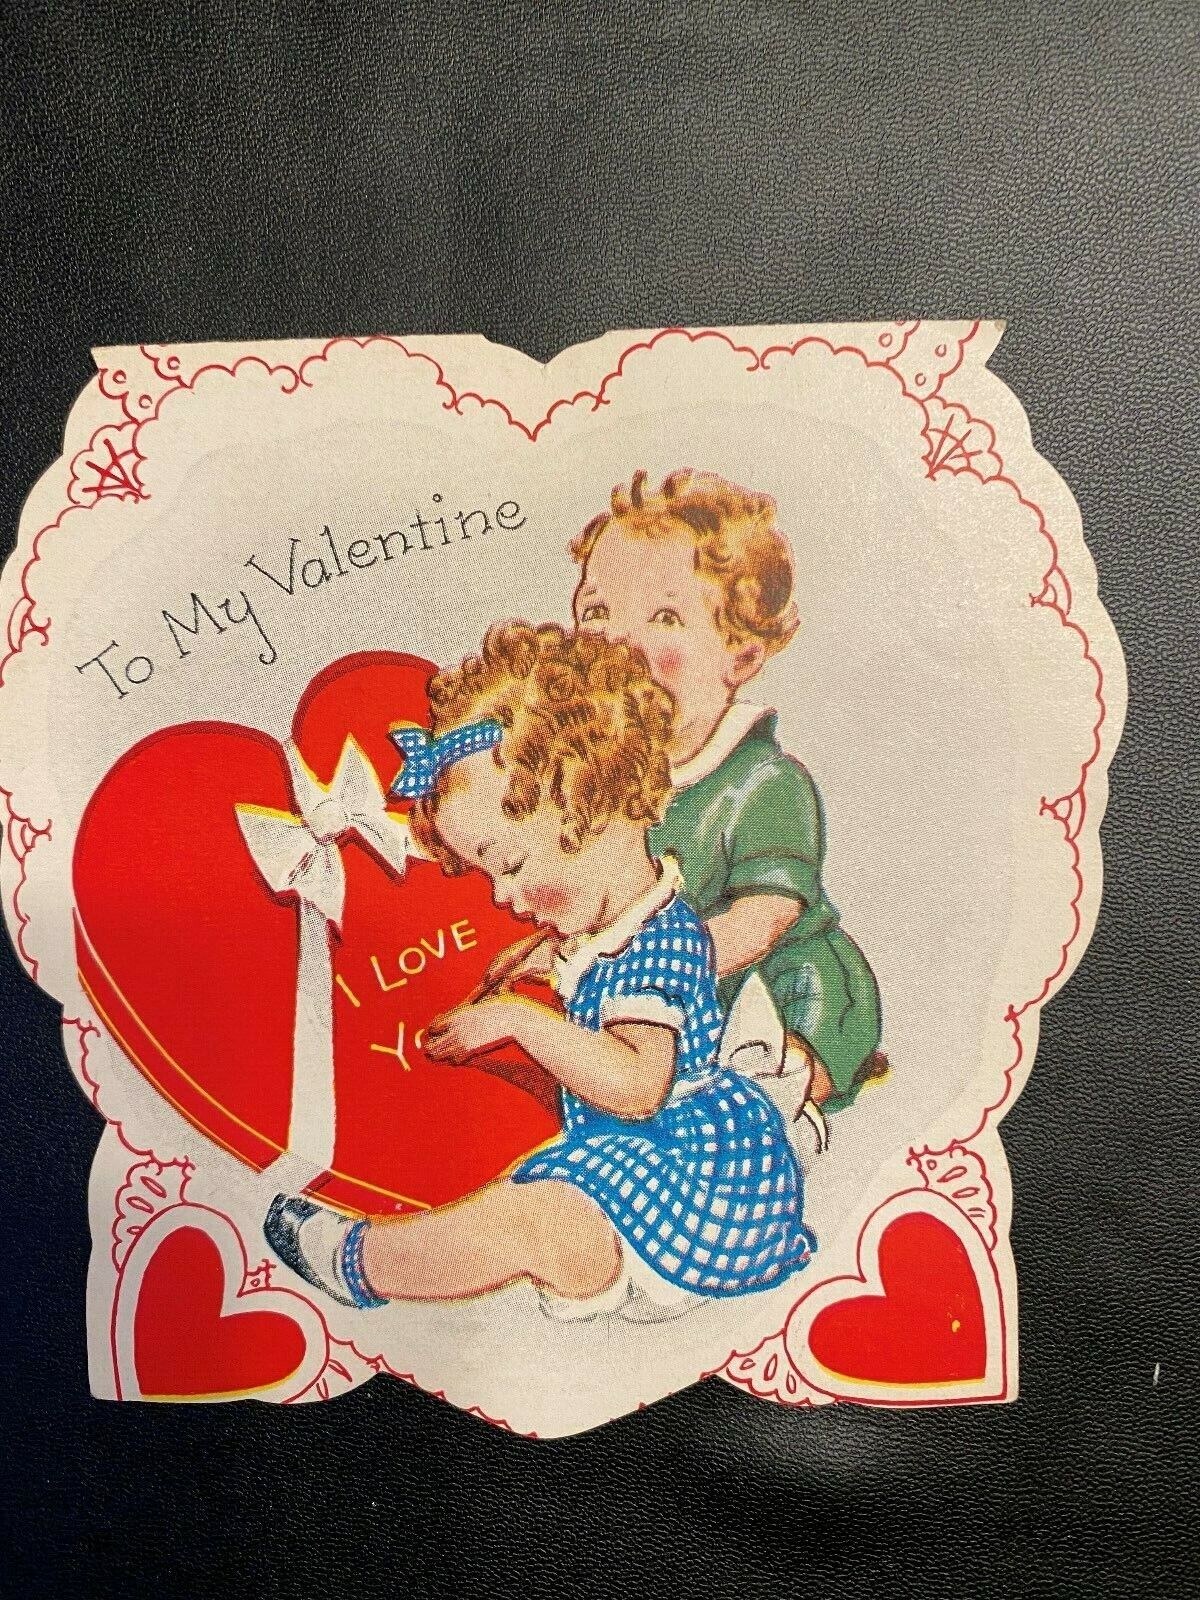 Vintage Valentine Card with 2 Small Kids. Signed by Sender